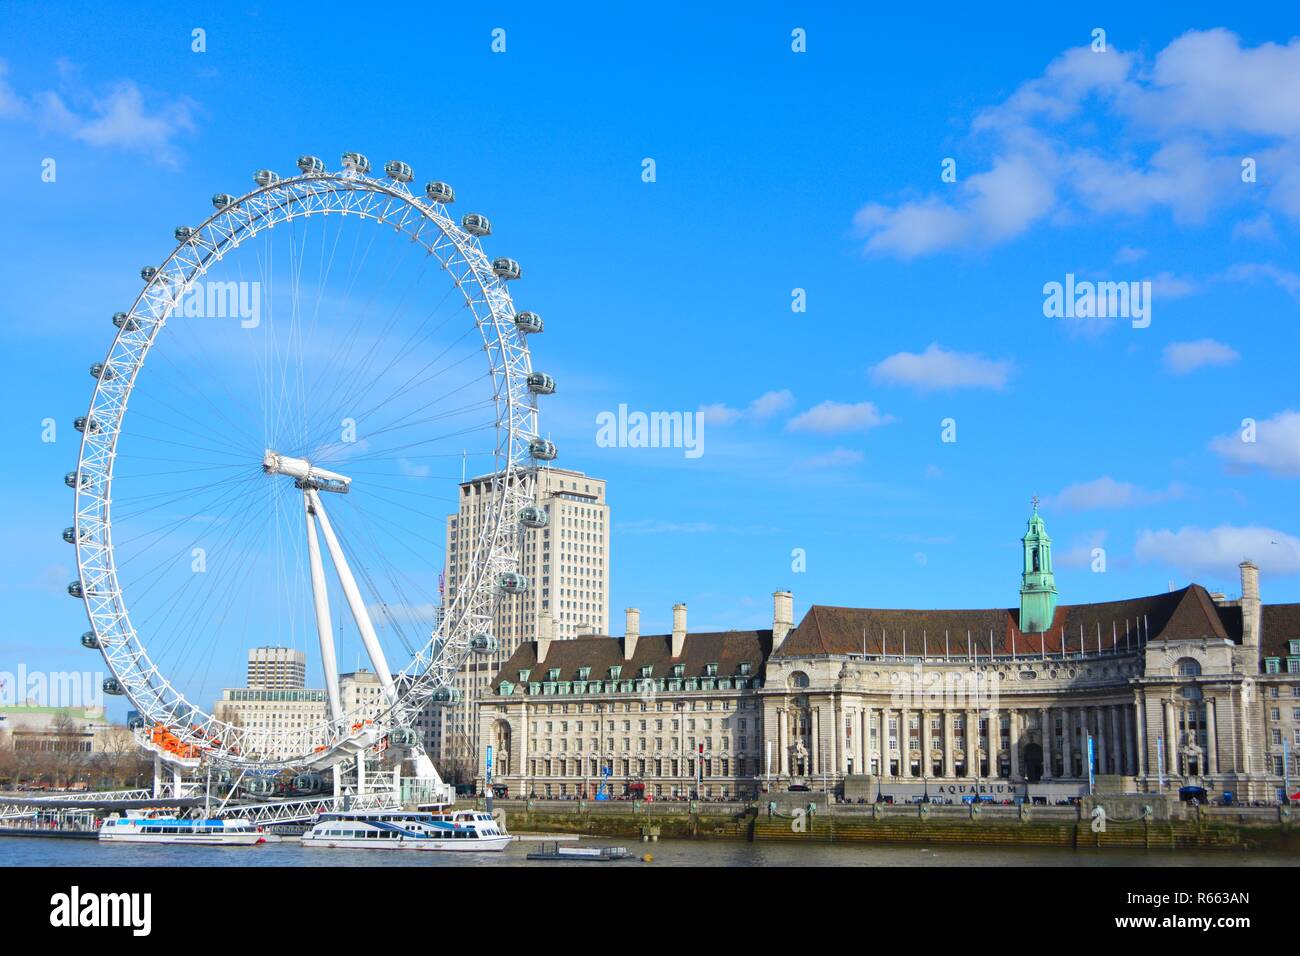 London Eye or Millennium Wheel on South Bank of River Thames in London England, UK Stock Photo